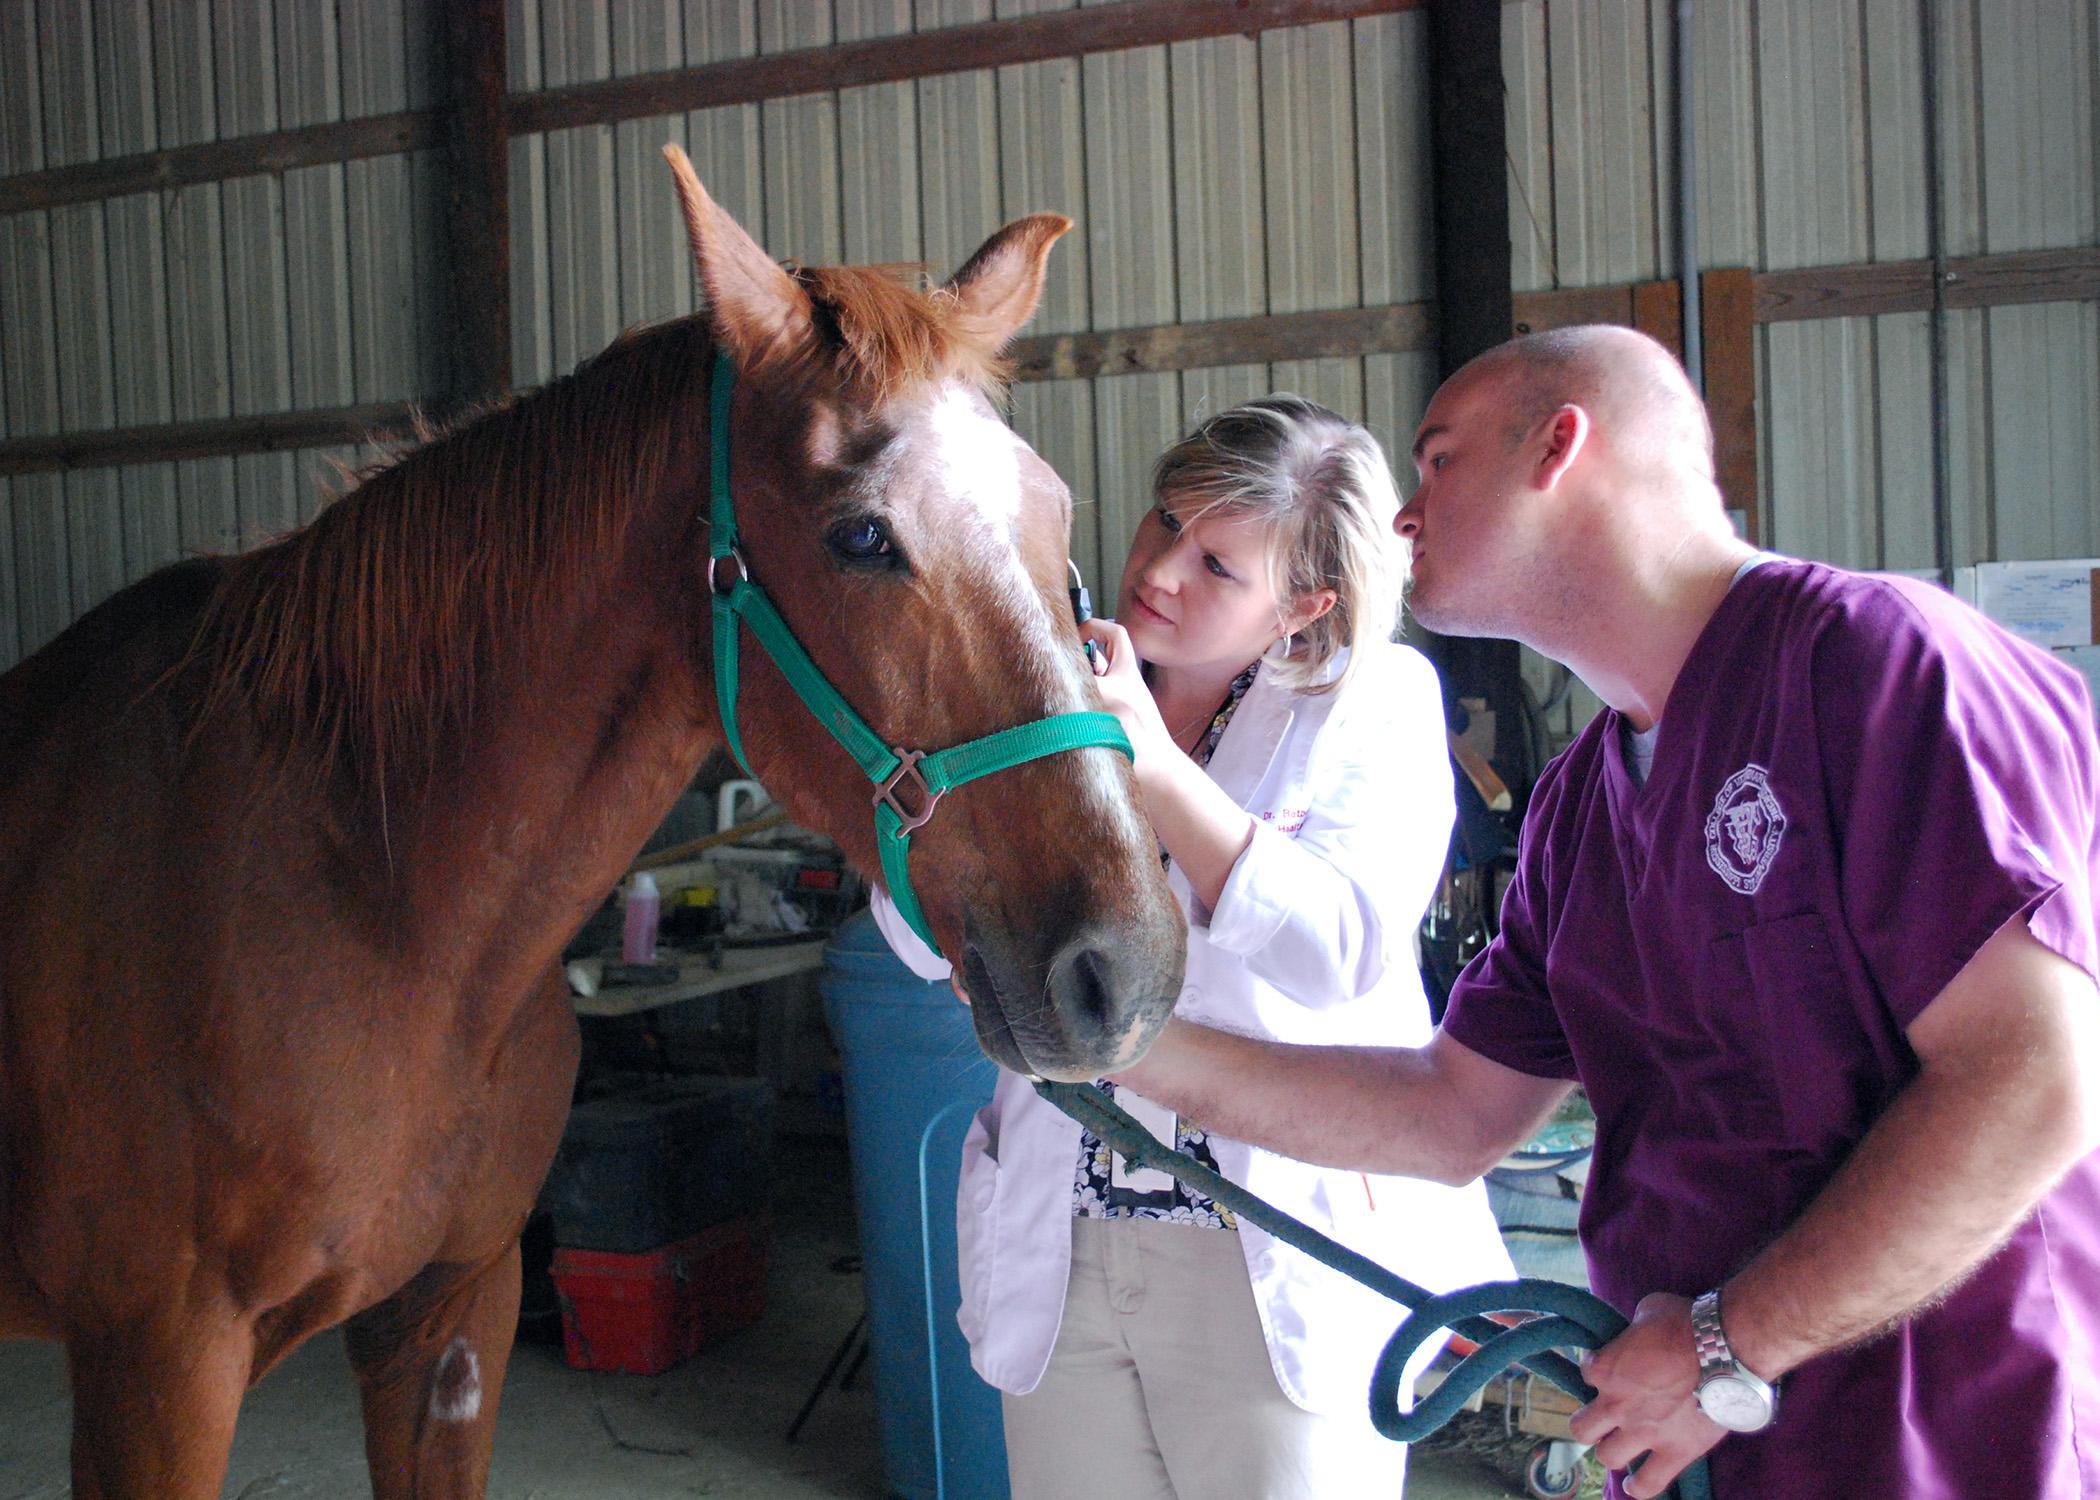 Dr. Caroline Betbeze performs an eye exam on a horse at Palmer Home in Columbus while fourth-year veterinary student Steven Davison looks on. The free exam was one of many offered for service animals as part of a national program. (Photo by MSU College of Veterinary Medicine/Karen Templeton)